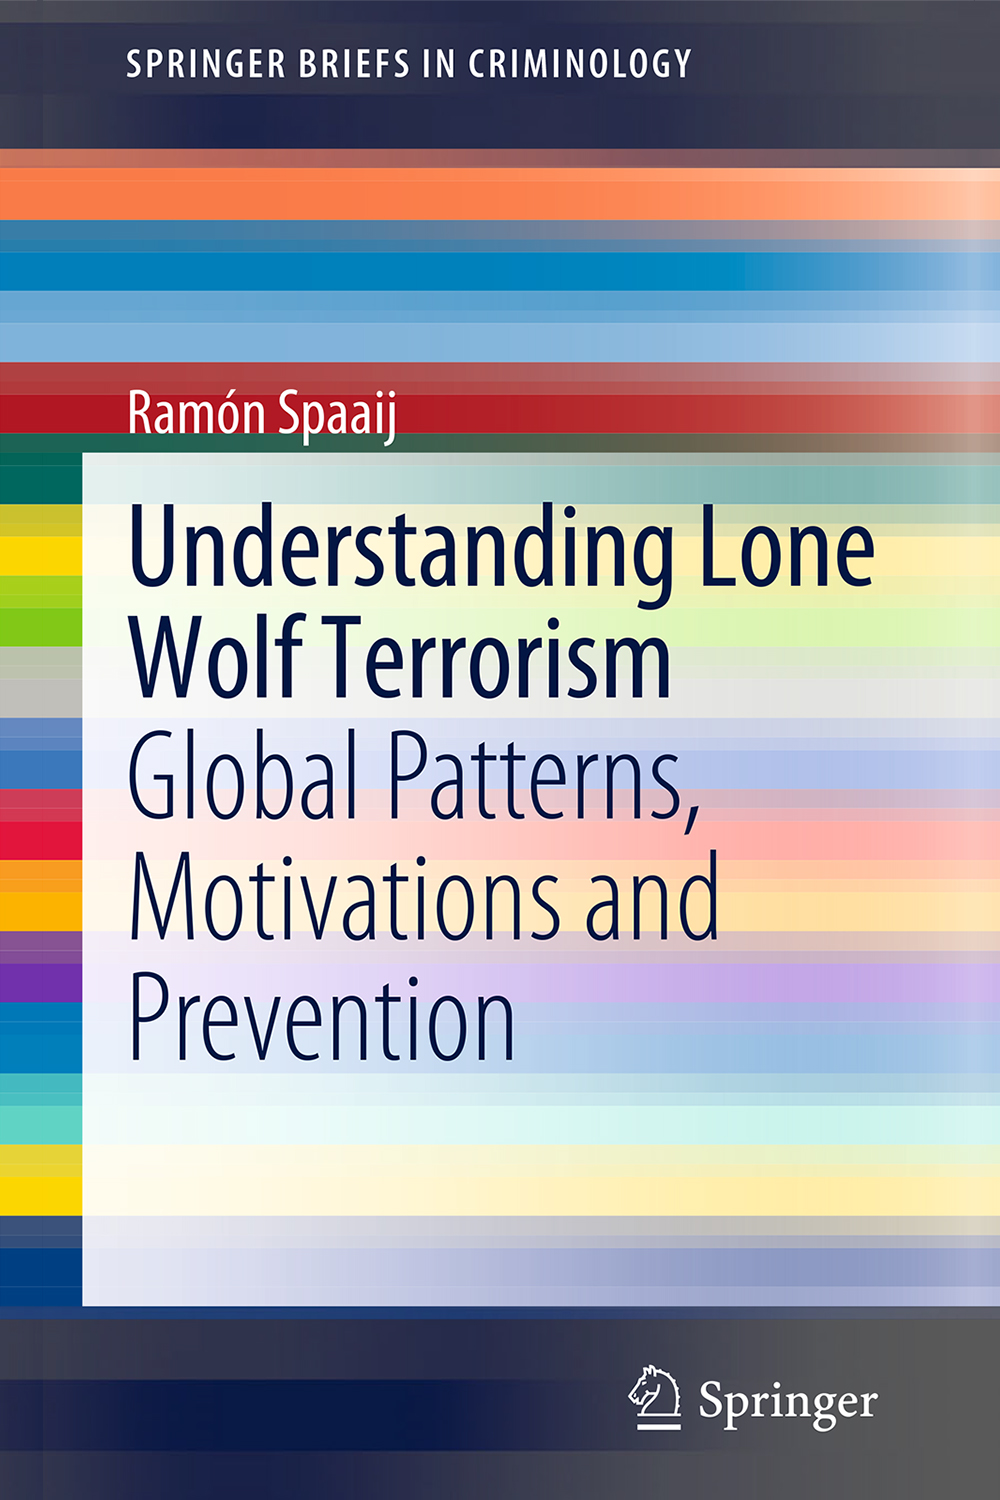 research questions about terrorism